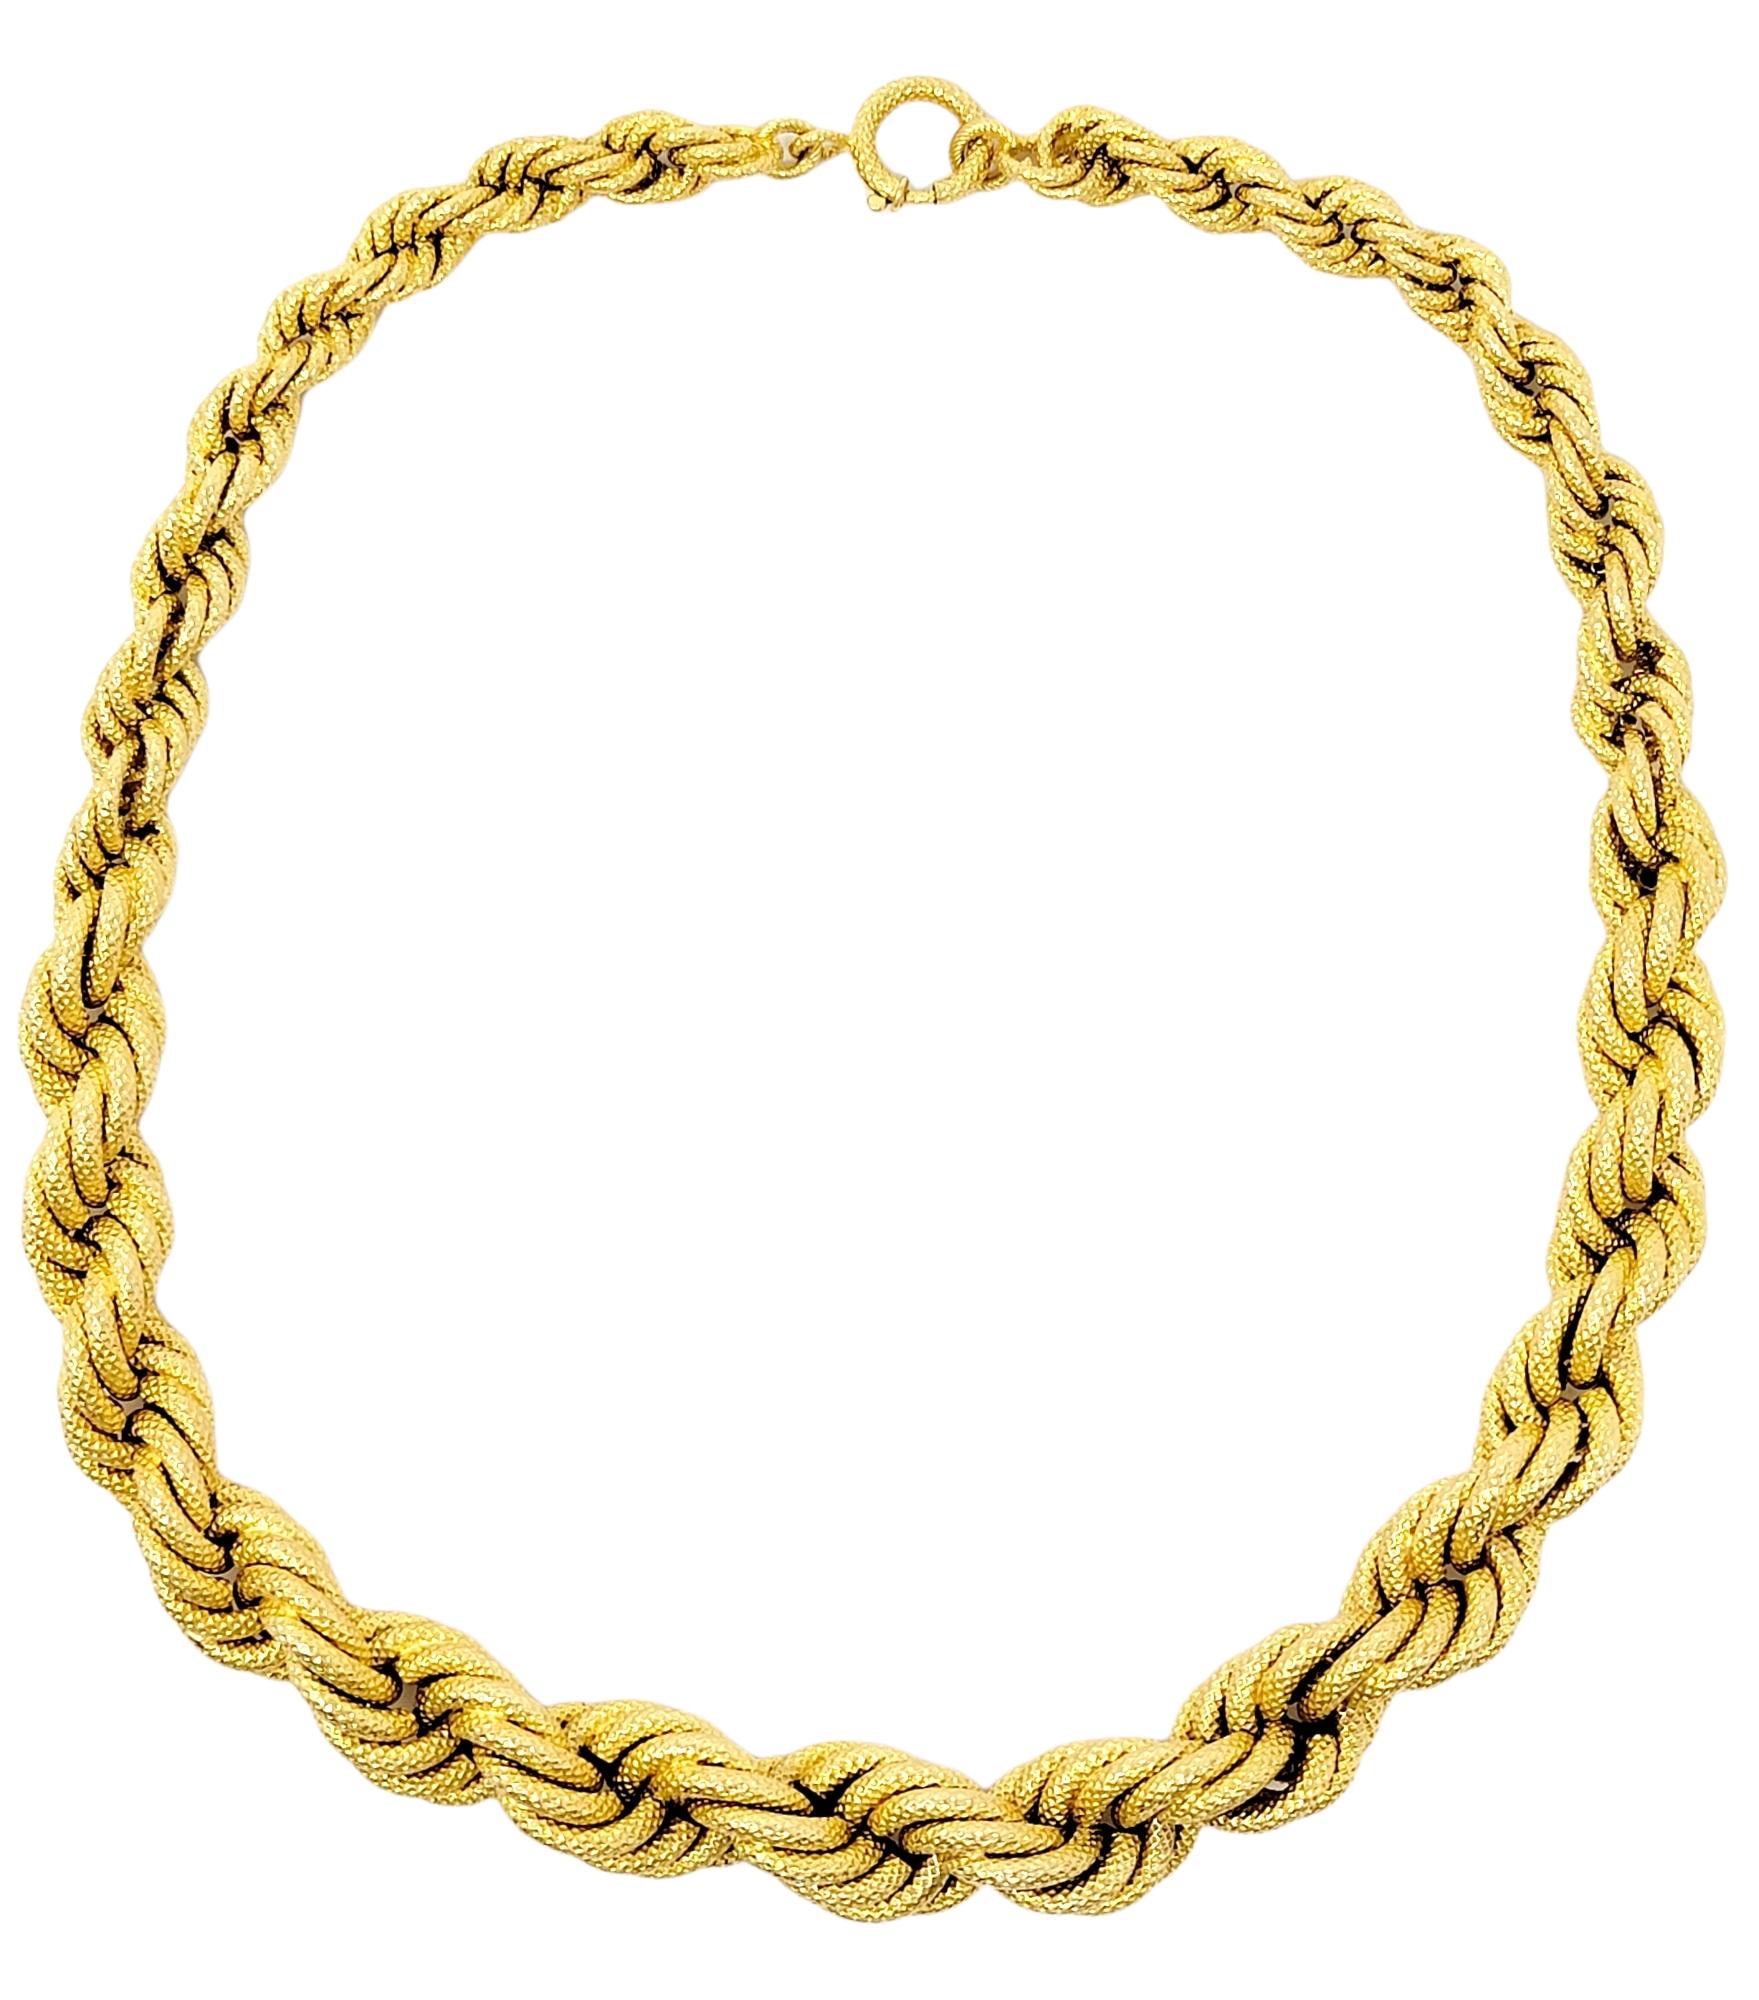 20 pennyweight gold chain